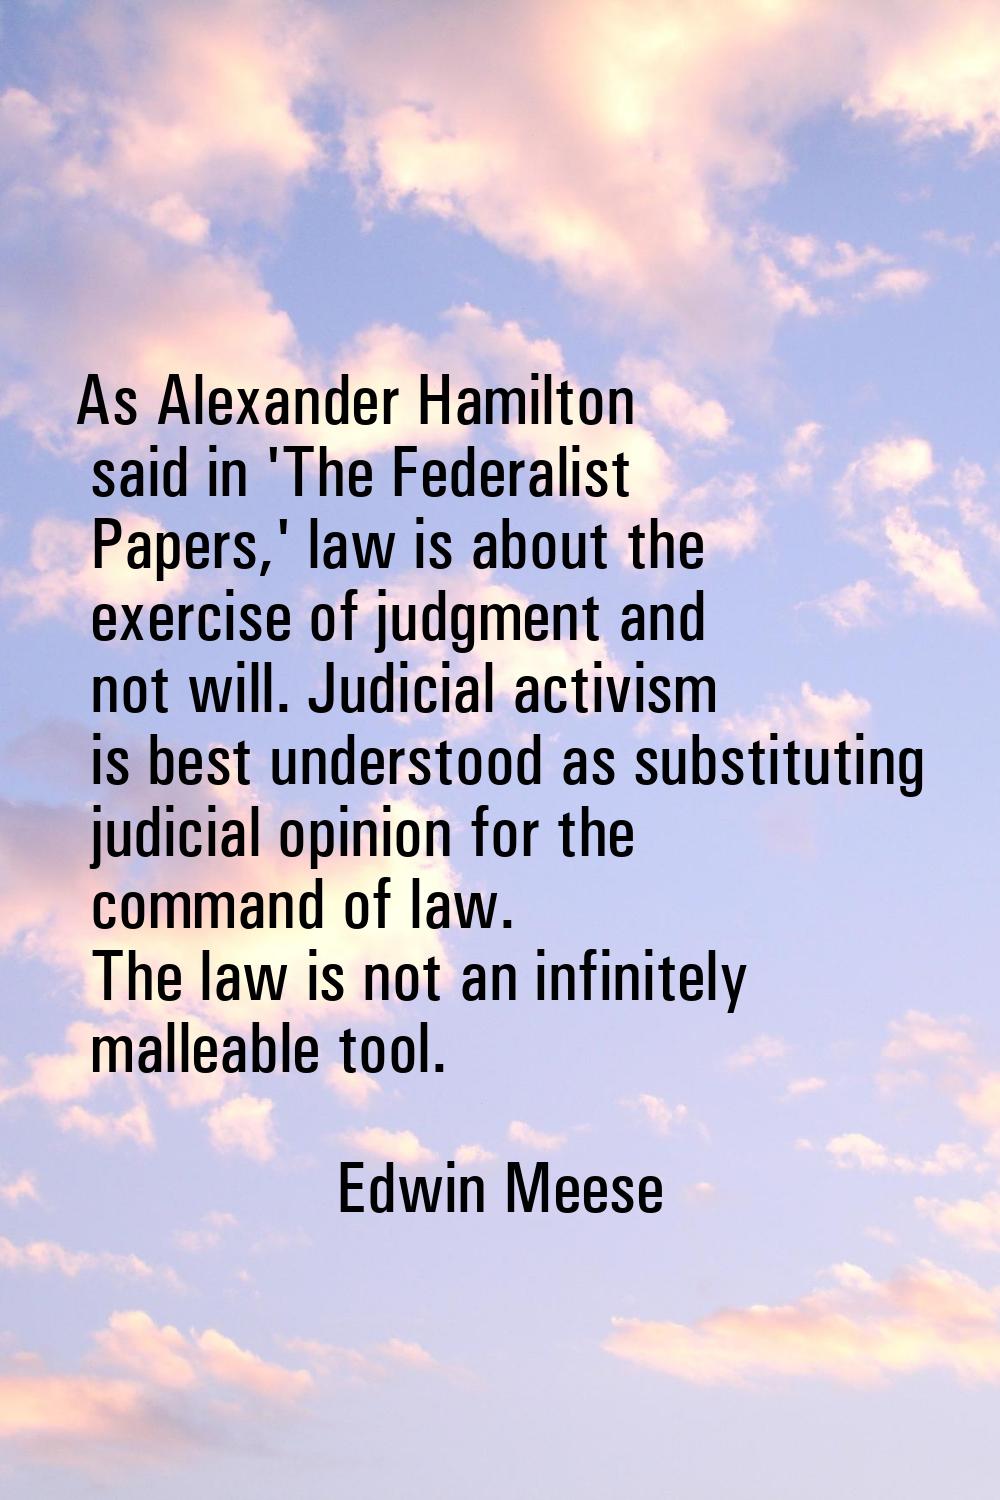 As Alexander Hamilton said in 'The Federalist Papers,' law is about the exercise of judgment and no